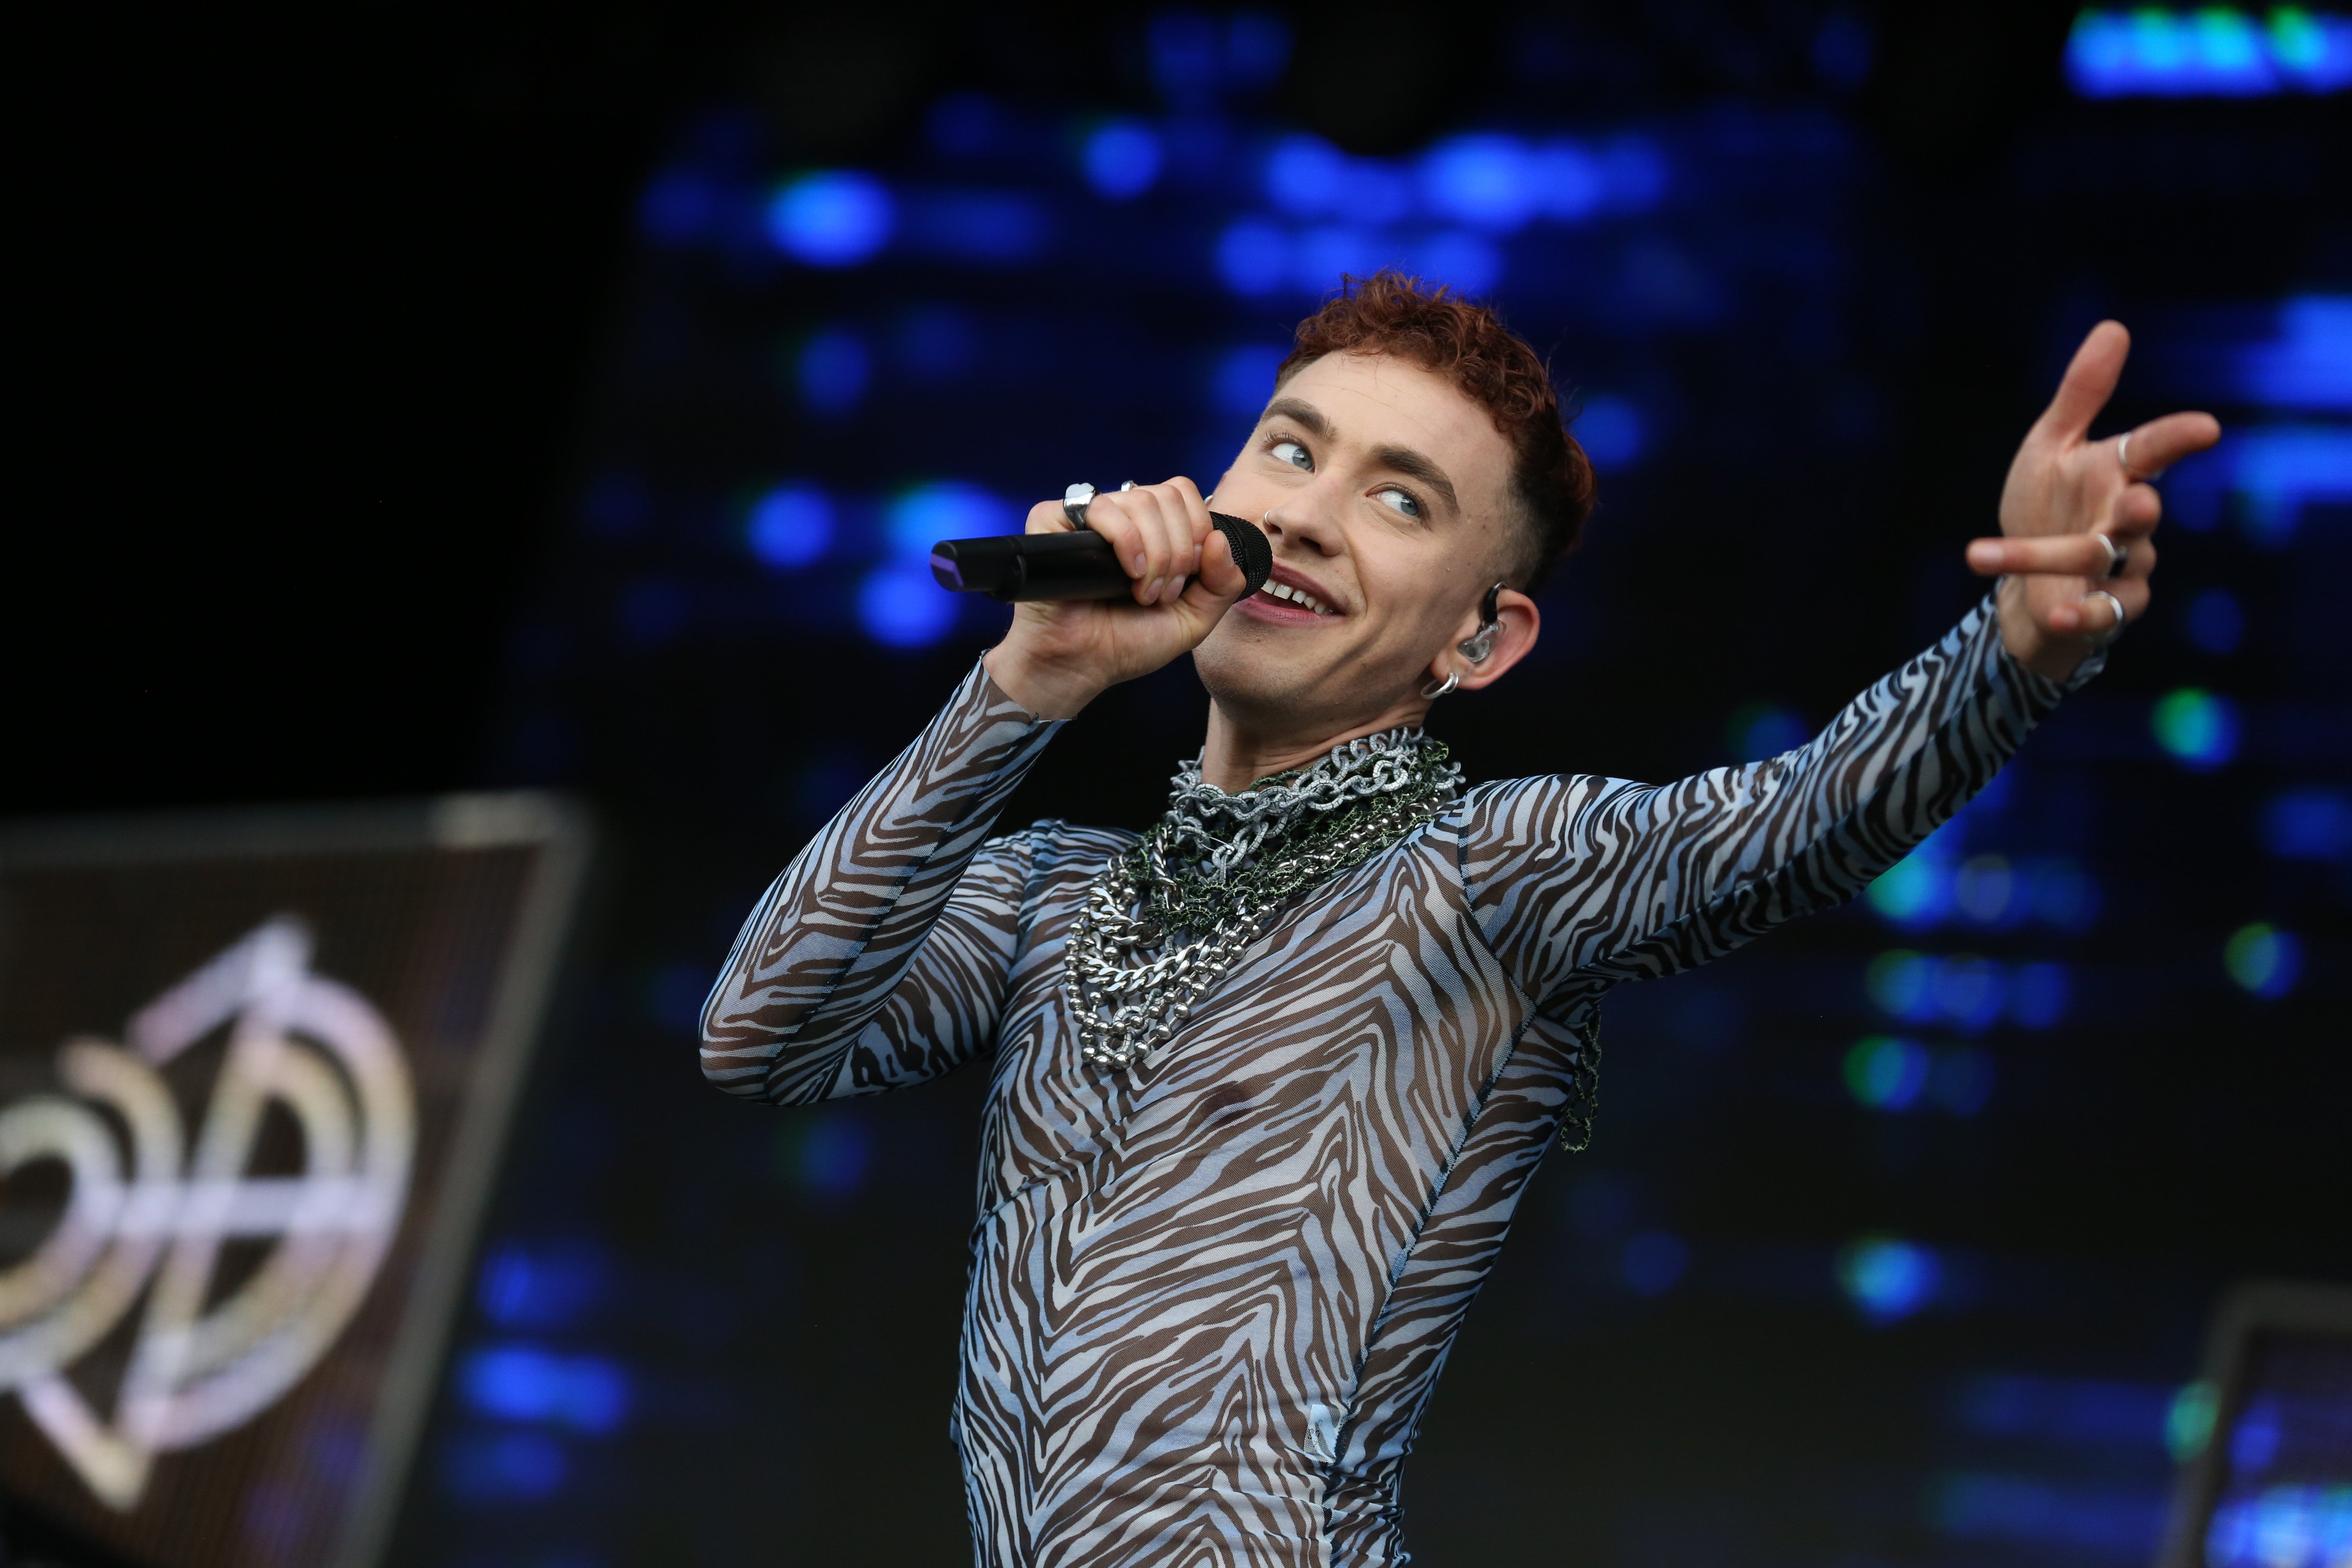 Olly Alexander signed a letter accusing Israel of genocide and being an apartheid state